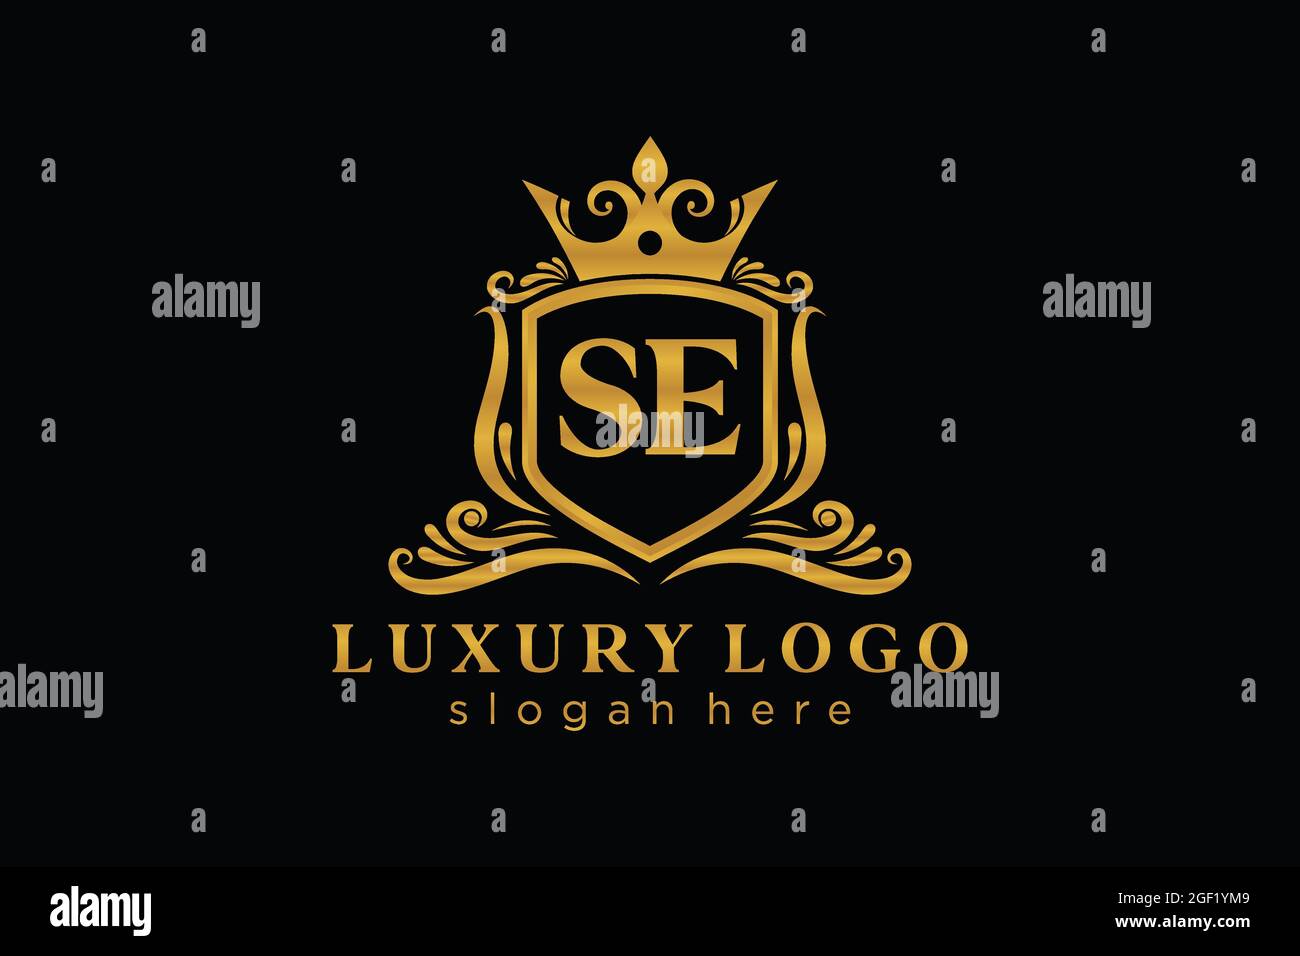 SE Letter Royal Luxury Logo template in vector art for Restaurant, Royalty, Boutique, Cafe, Hotel, Heraldic, Jewelry, Fashion and other vector illustr Stock Vector